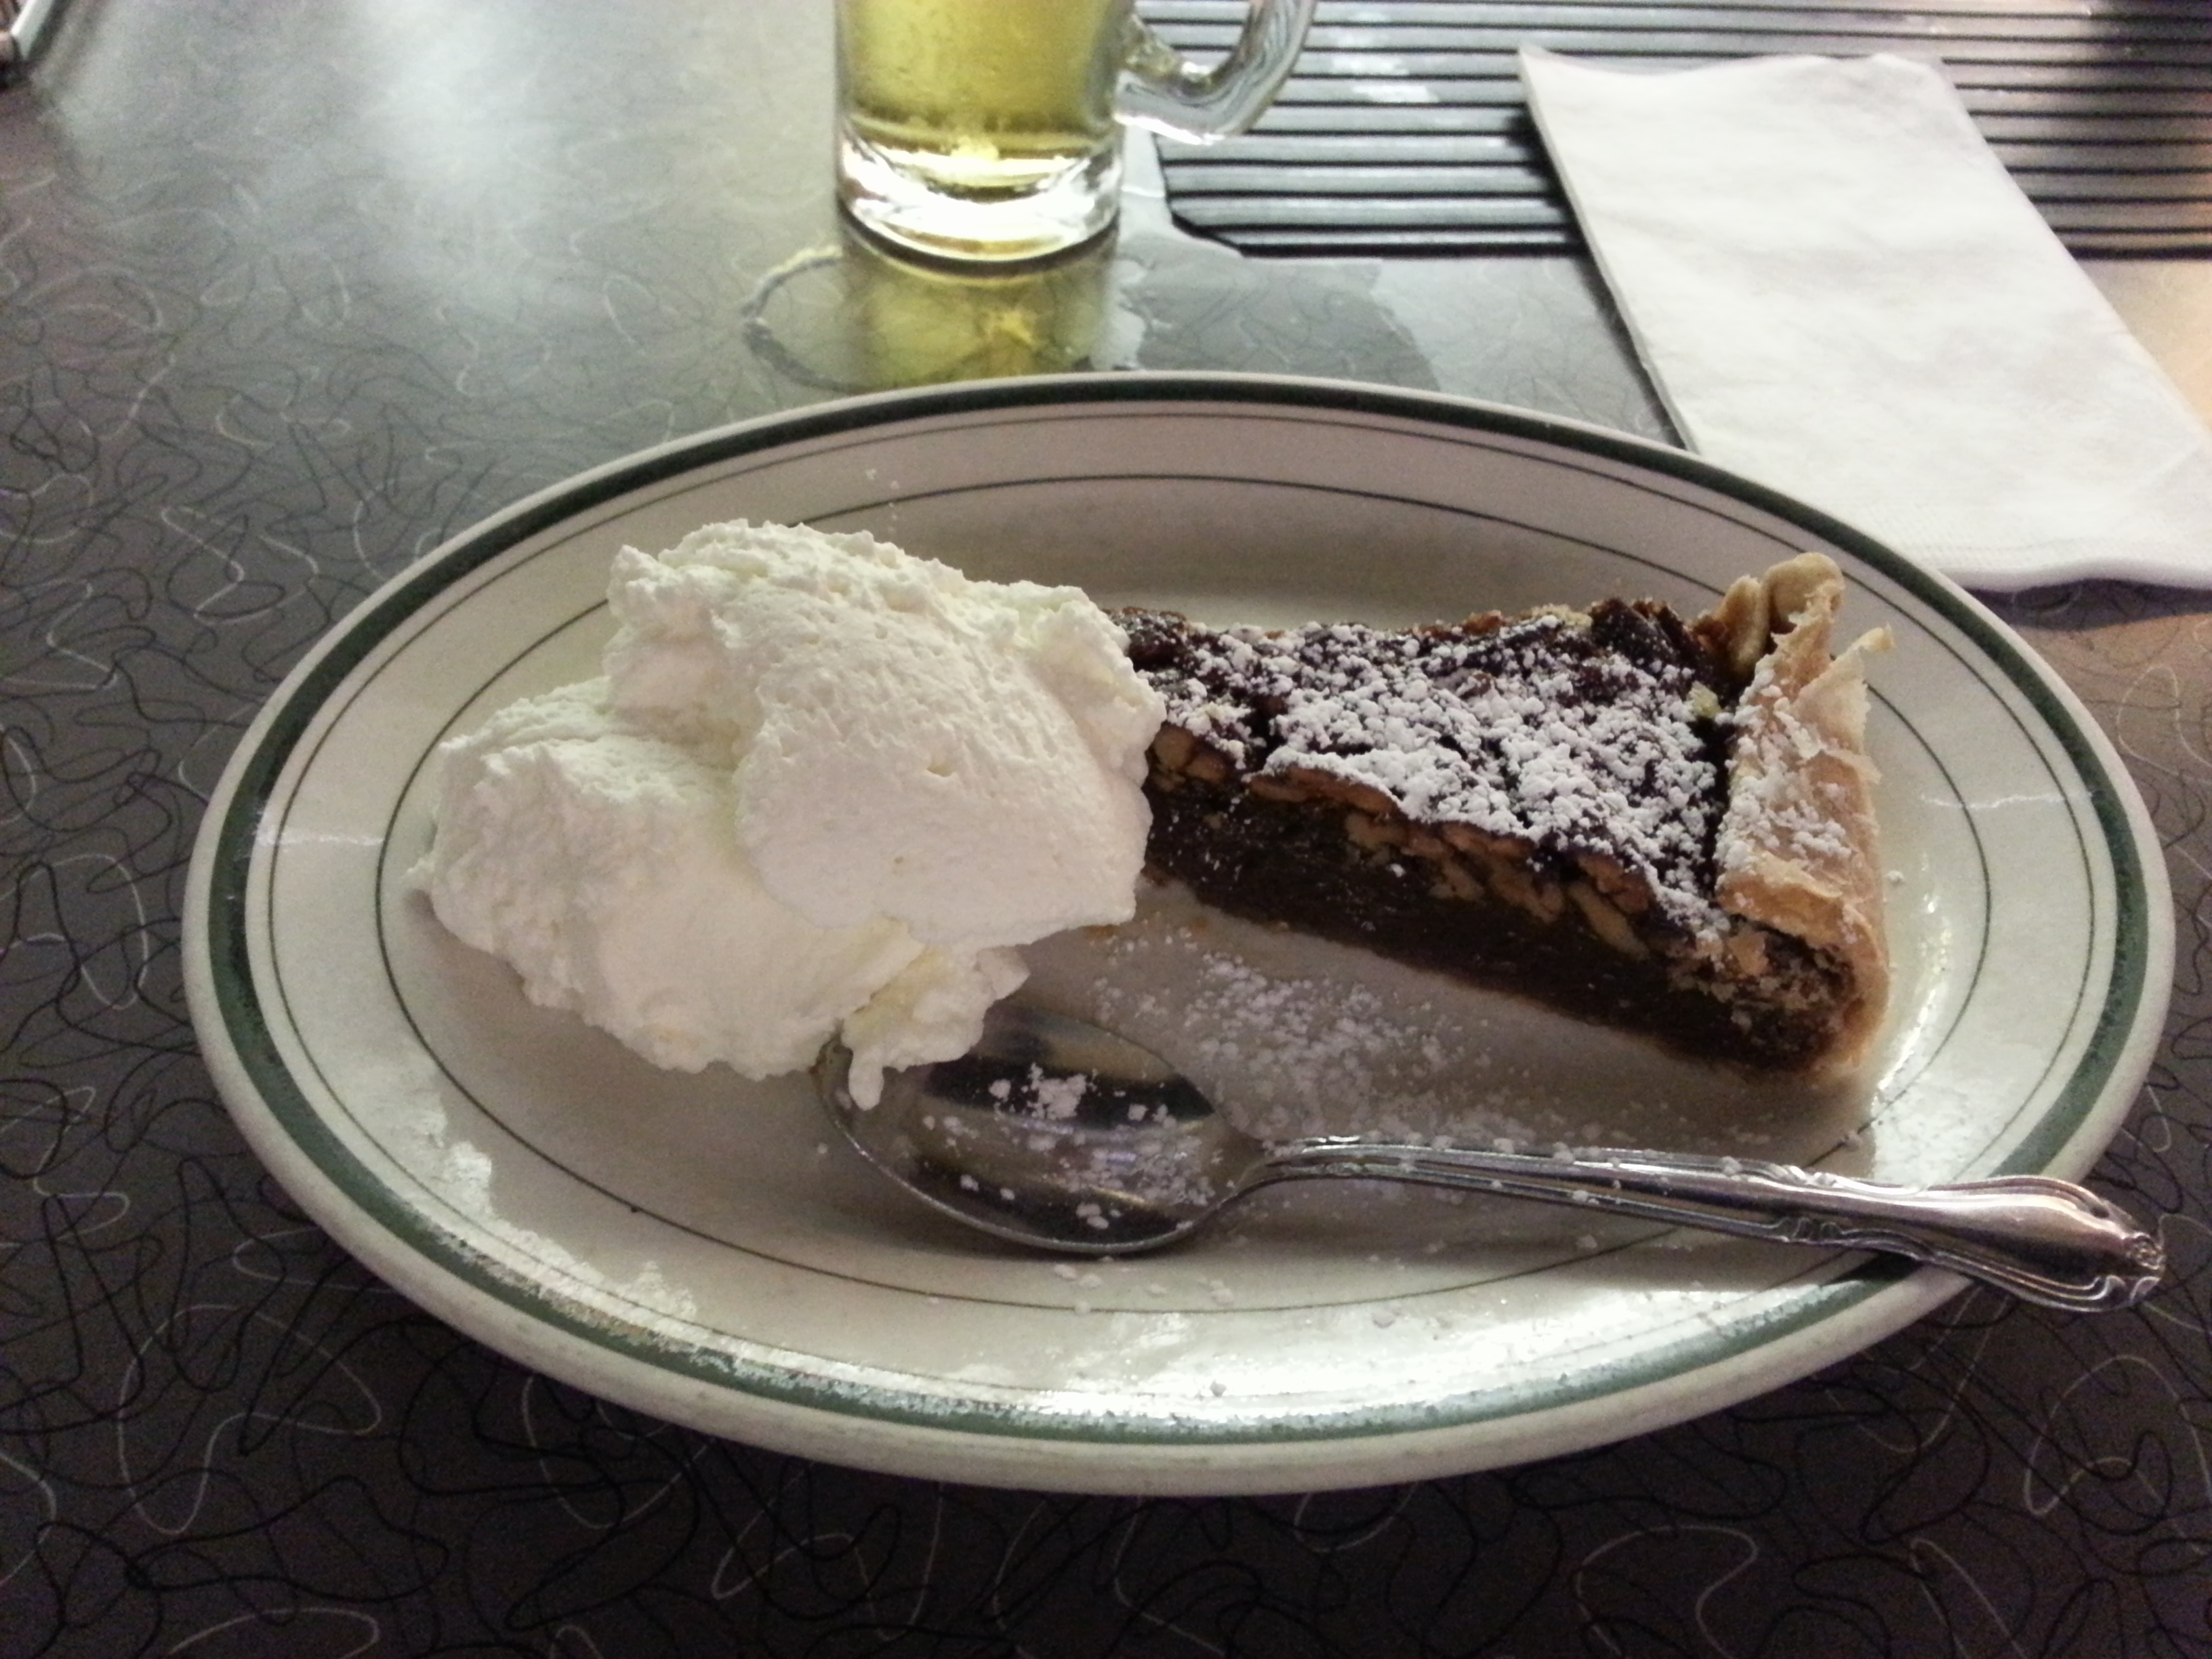 Pecan Pie was Trip Tucker's (Star Trek Enterprise) favourite dish and I wanted to experience it.